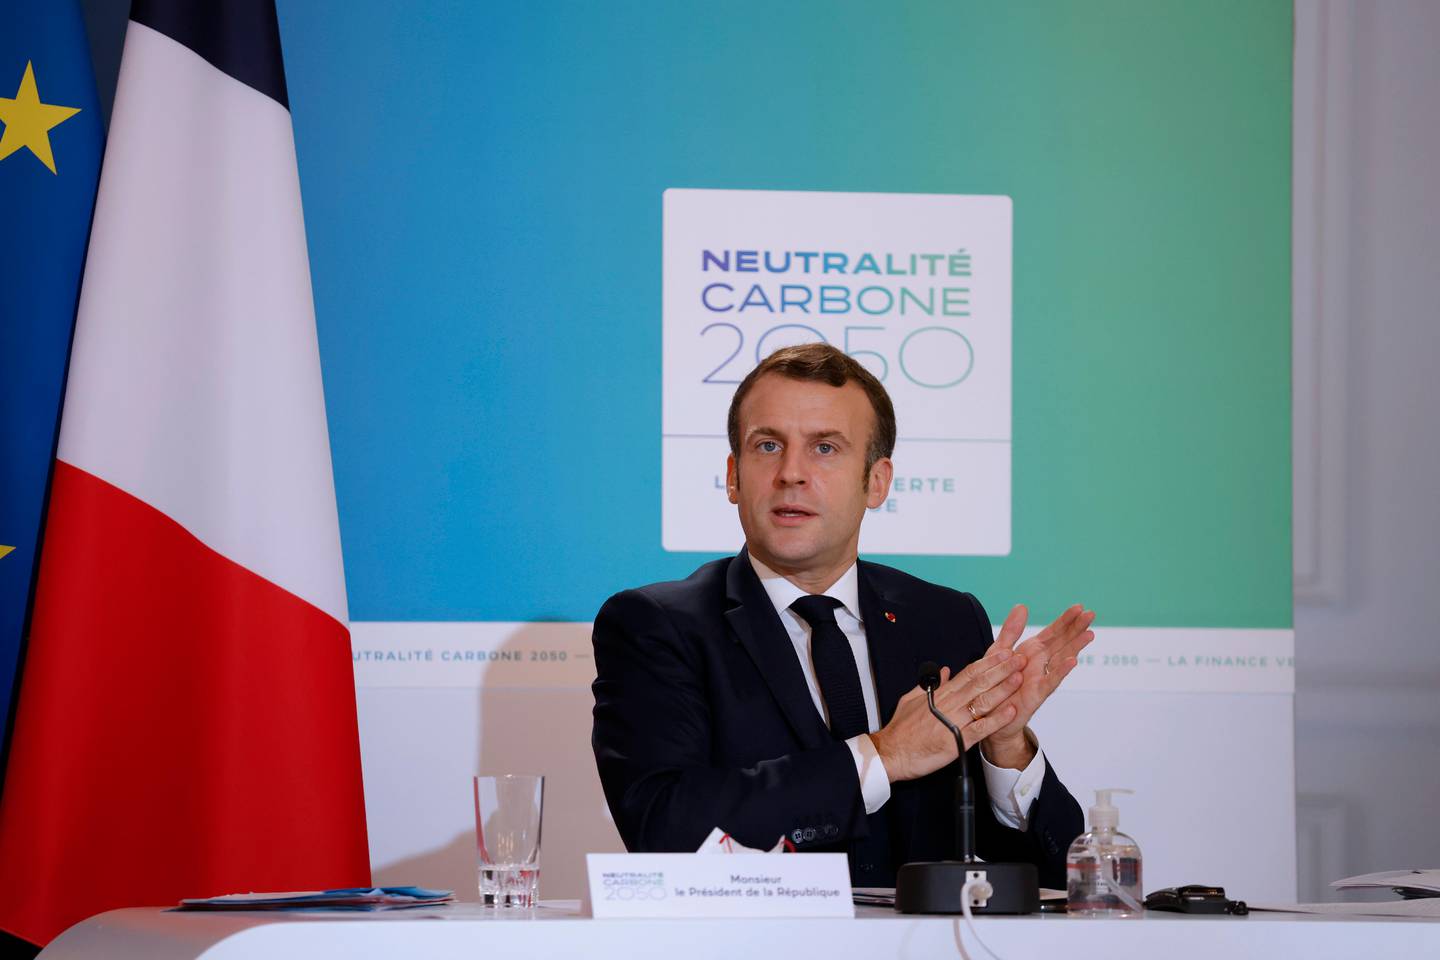 French President Emmanuel Macron speaks during a video conference meeting to mark the fifth anniversary of the Paris Climate agreement at the Elysee Palace in Paris, Saturday Dec.12, 2020. World leaders are staging a virtual gathering Saturday to celebrate the 5th anniversary of the Paris climate accord, which set a goal for keeping global temperatures from rising above levels that could have devastating consequences for mankind. (Yoan Valat, Pool via AP)